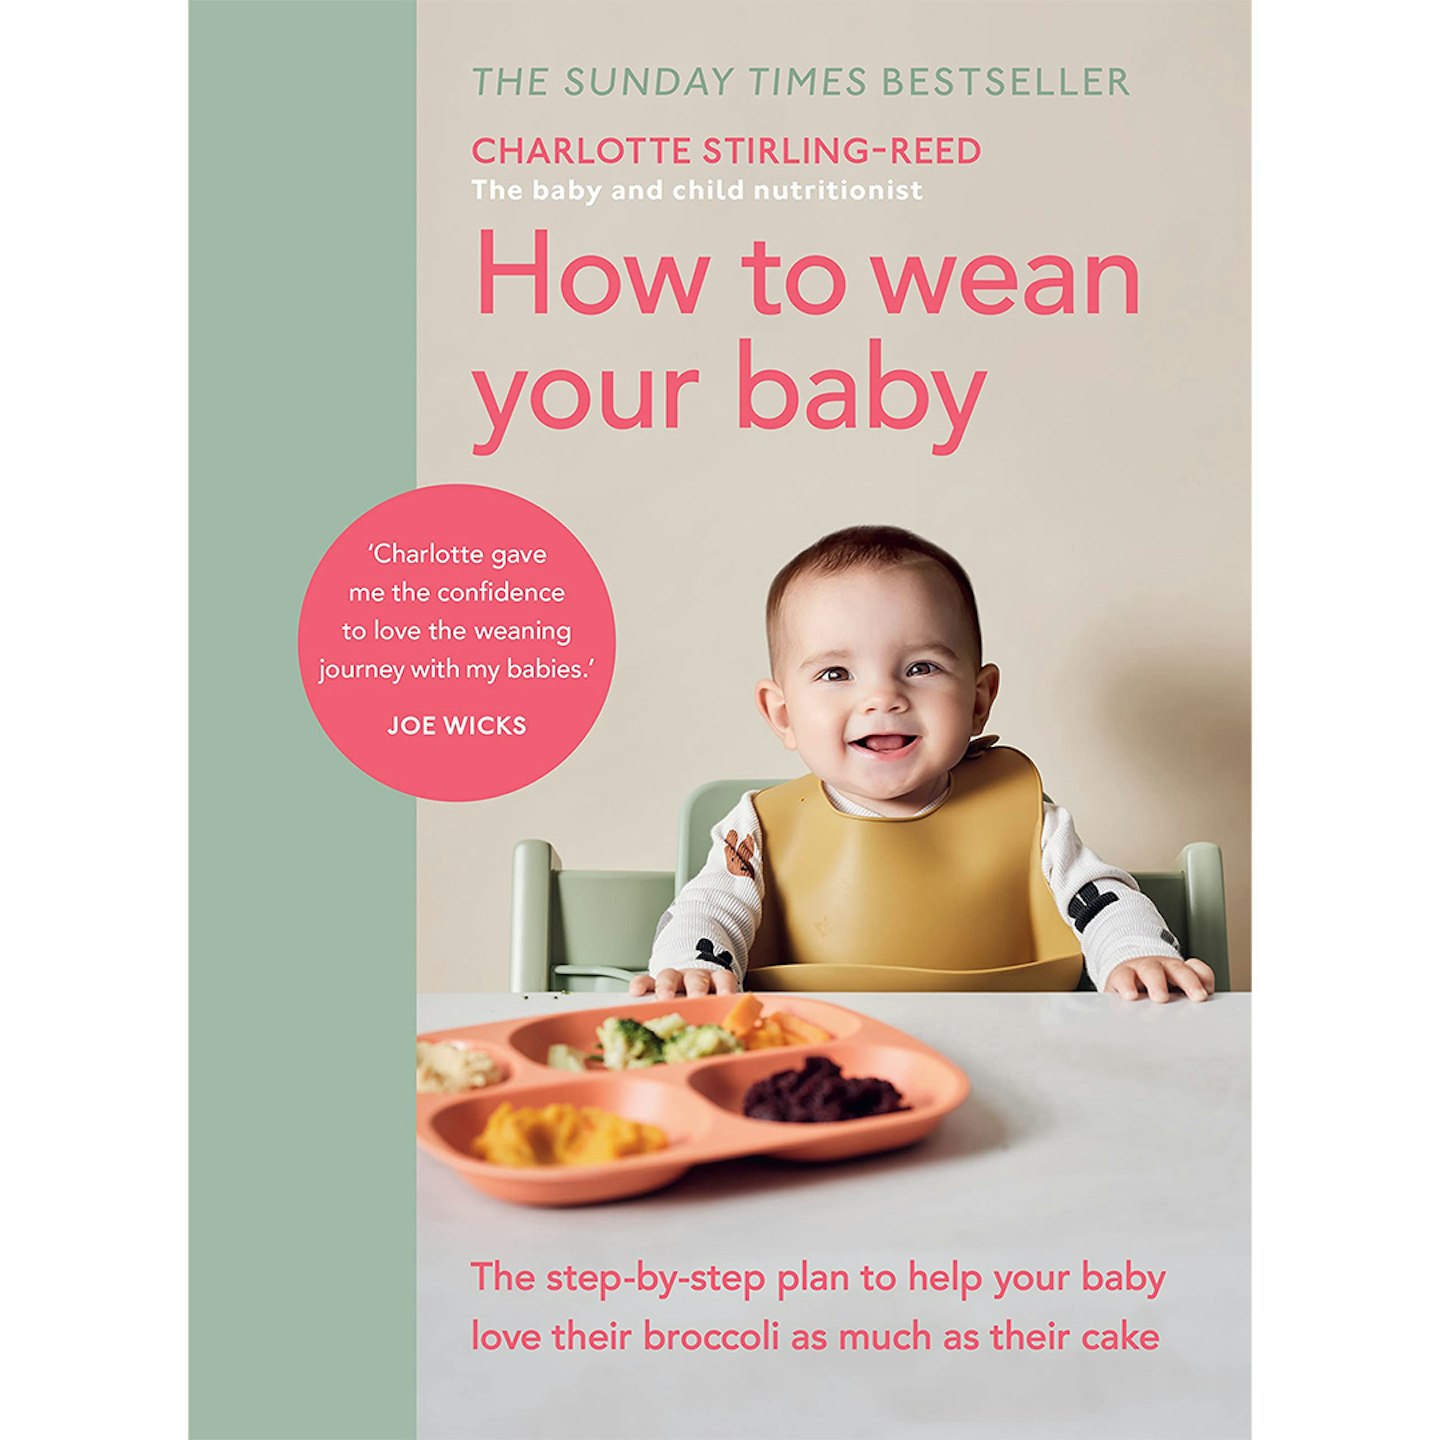 How to wean baby